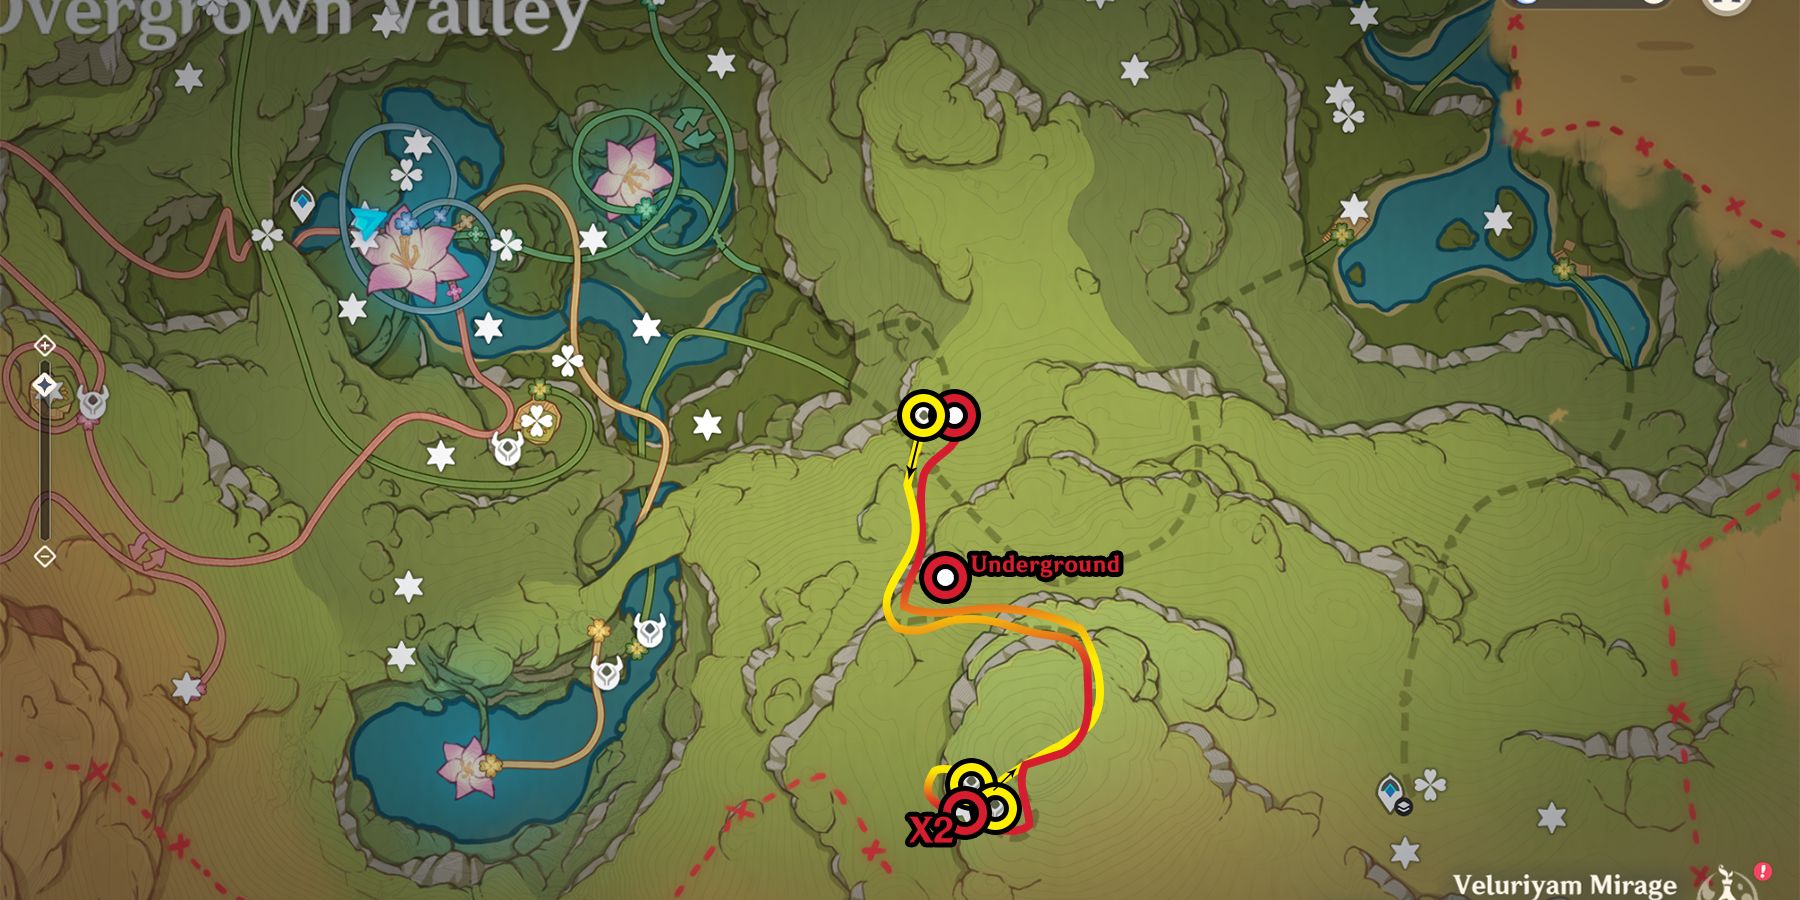 genshin impact overgrown valley chests location 15-18